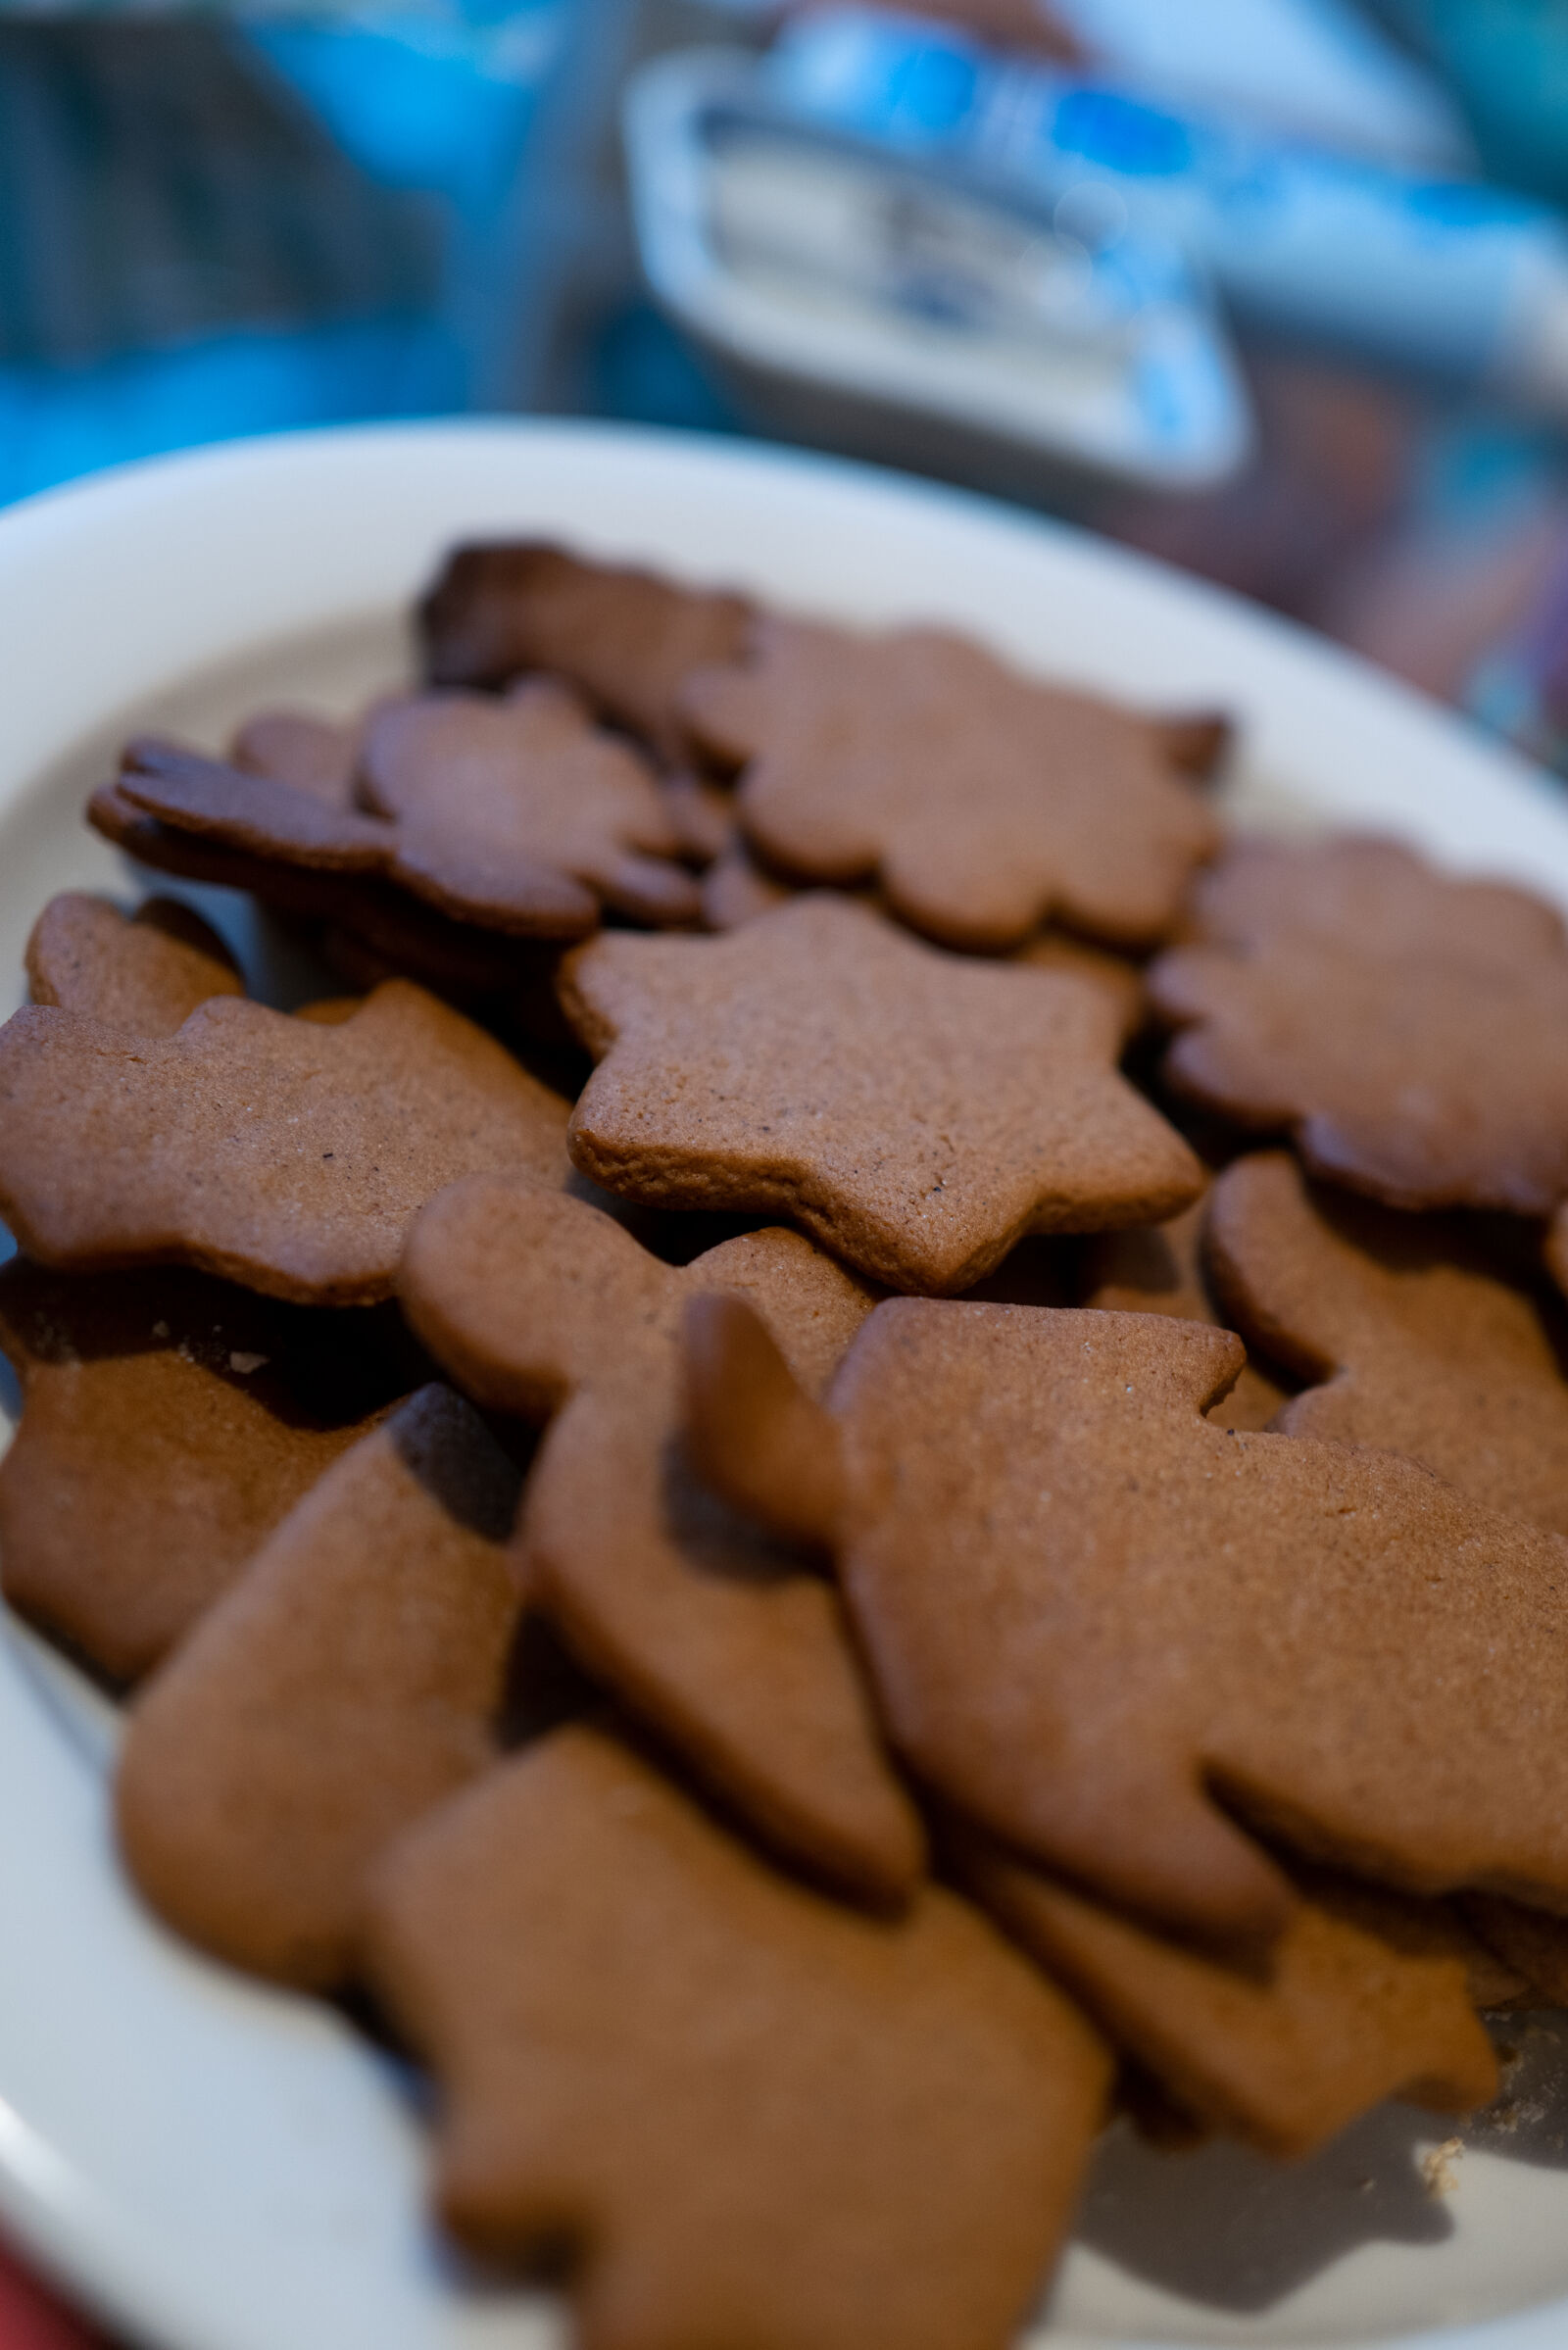 Leica Q2 sample photo. Bare gingerbreads photography